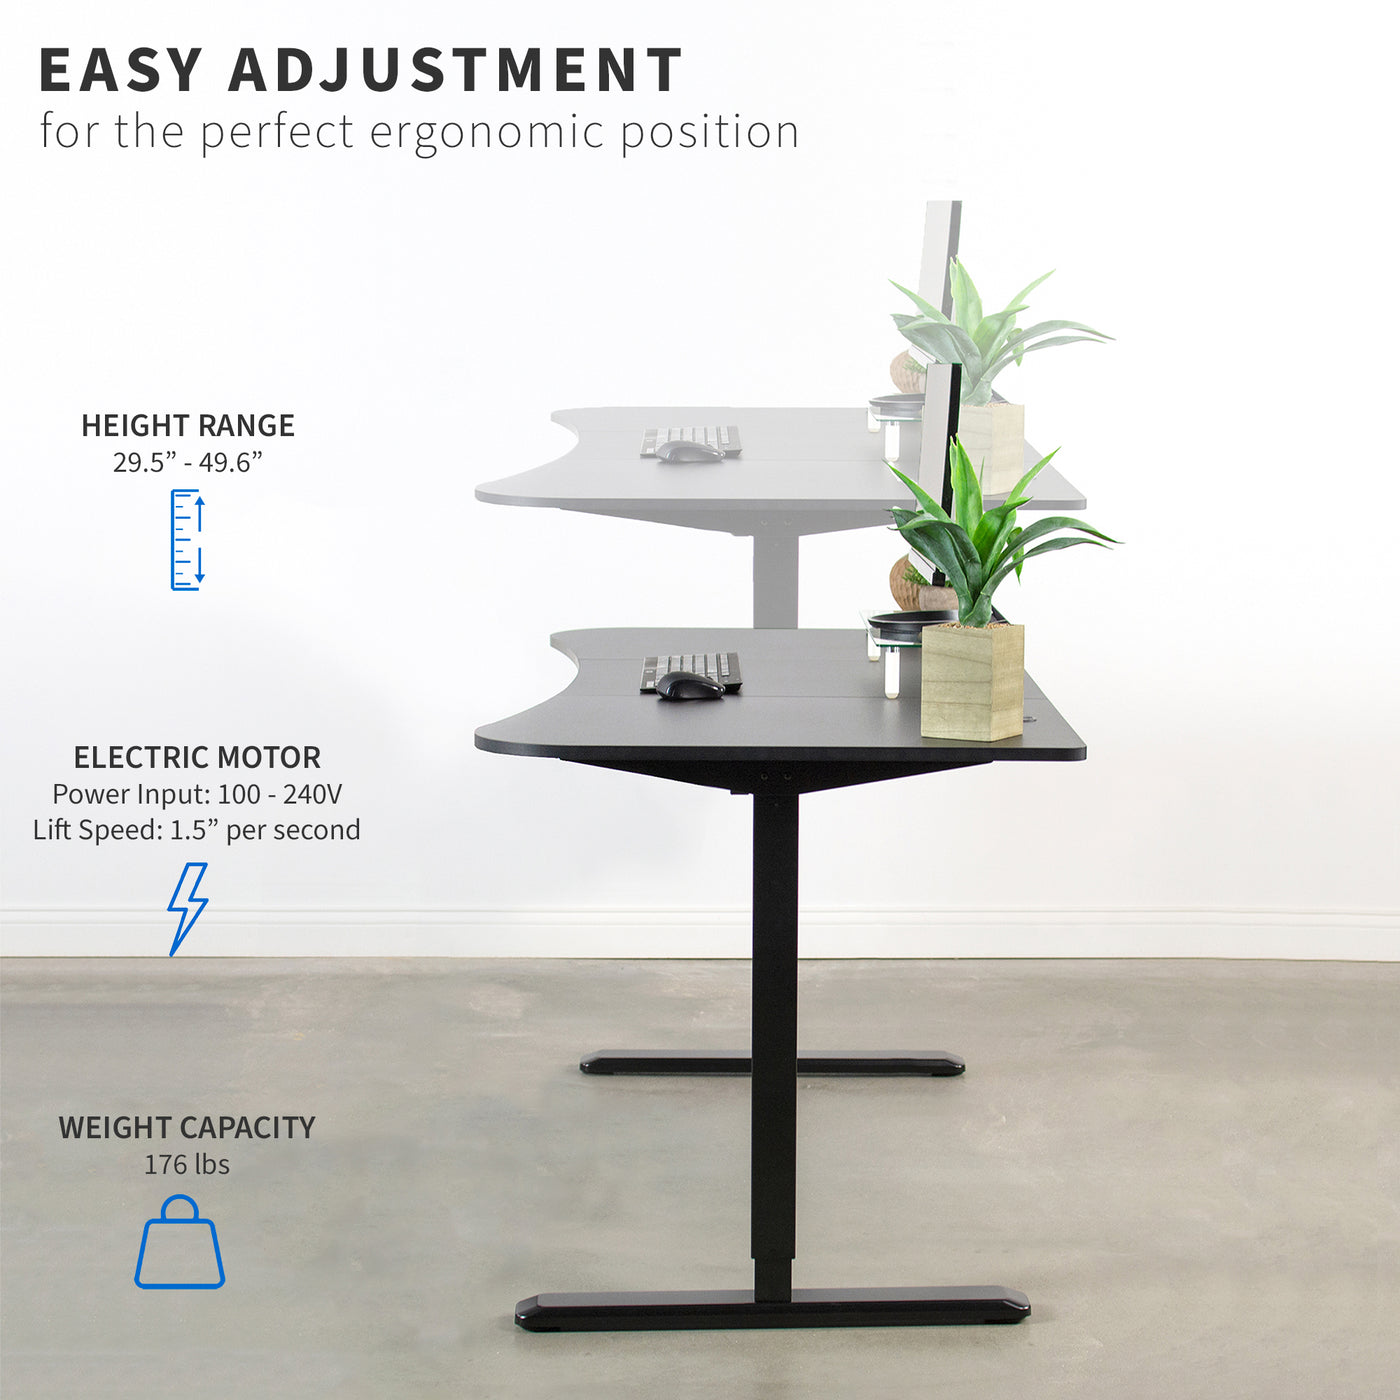 Easy adjustment along the height range from sitting to standing maximizing comfort while working.